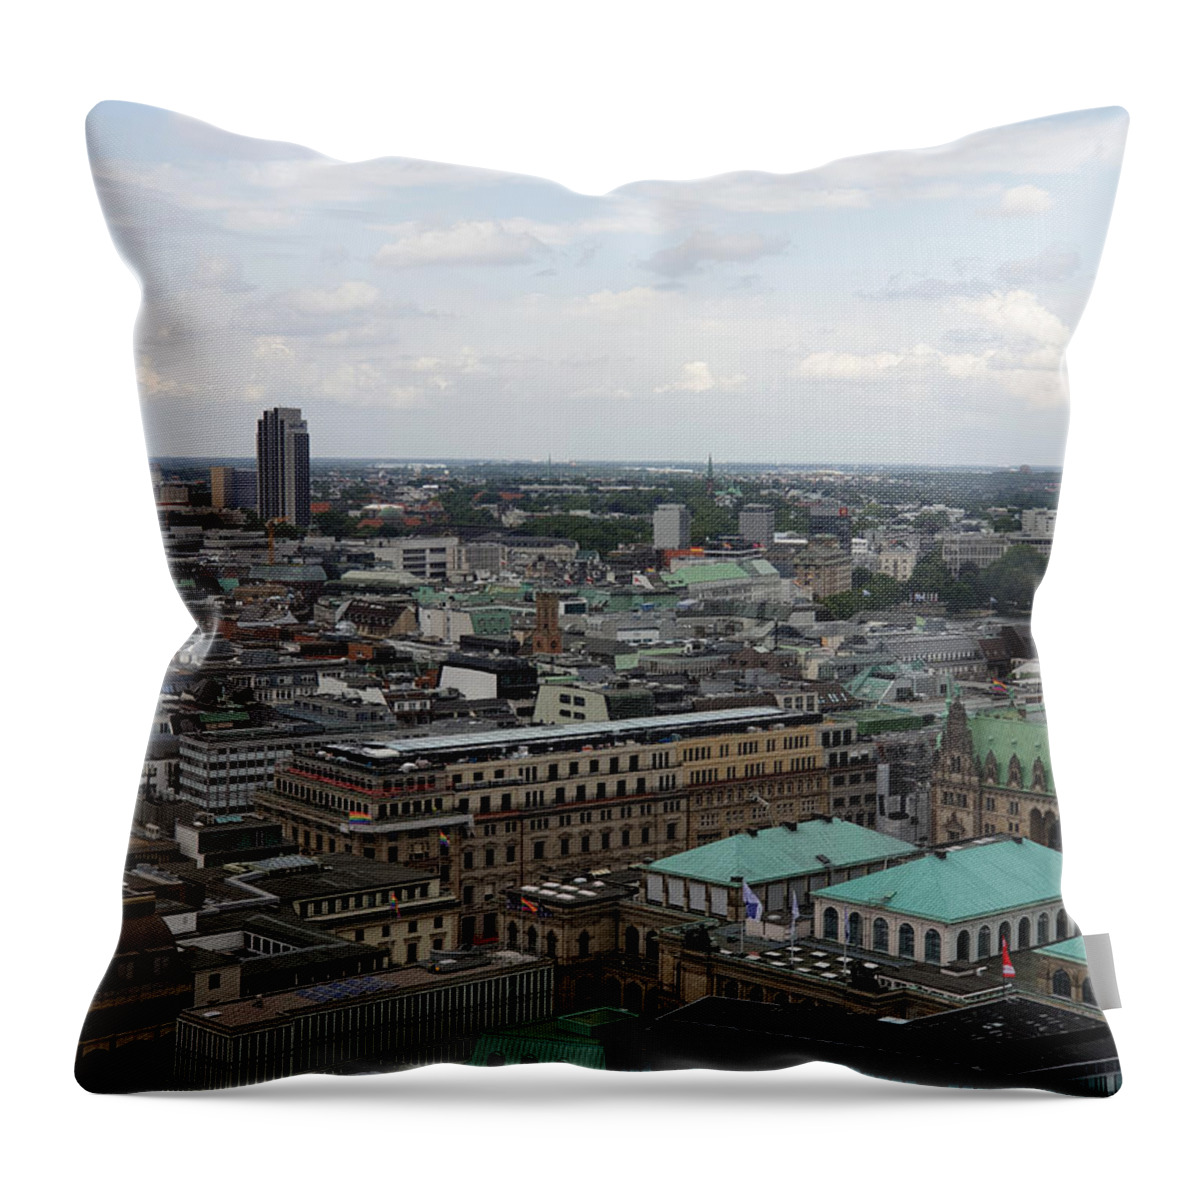 Hamburg Throw Pillow featuring the photograph Hamburg Rooftops View by Yvonne Johnstone